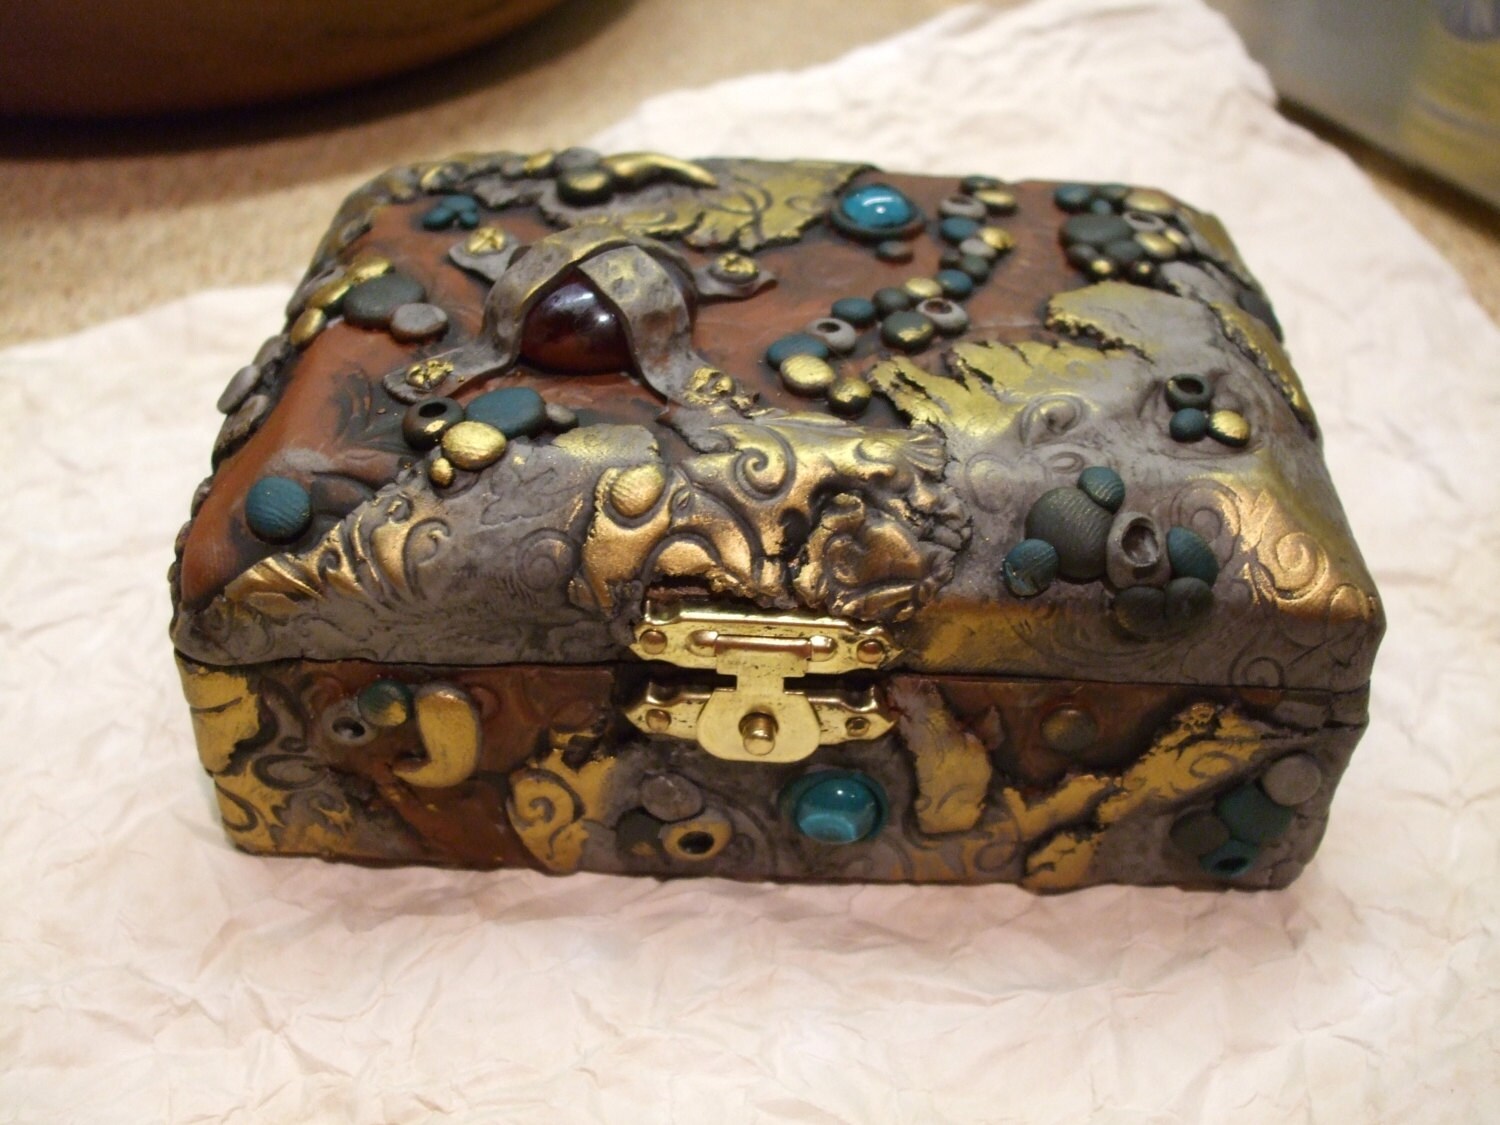 Wooden box covered in polymer clay by ReevarooCreations on Etsy